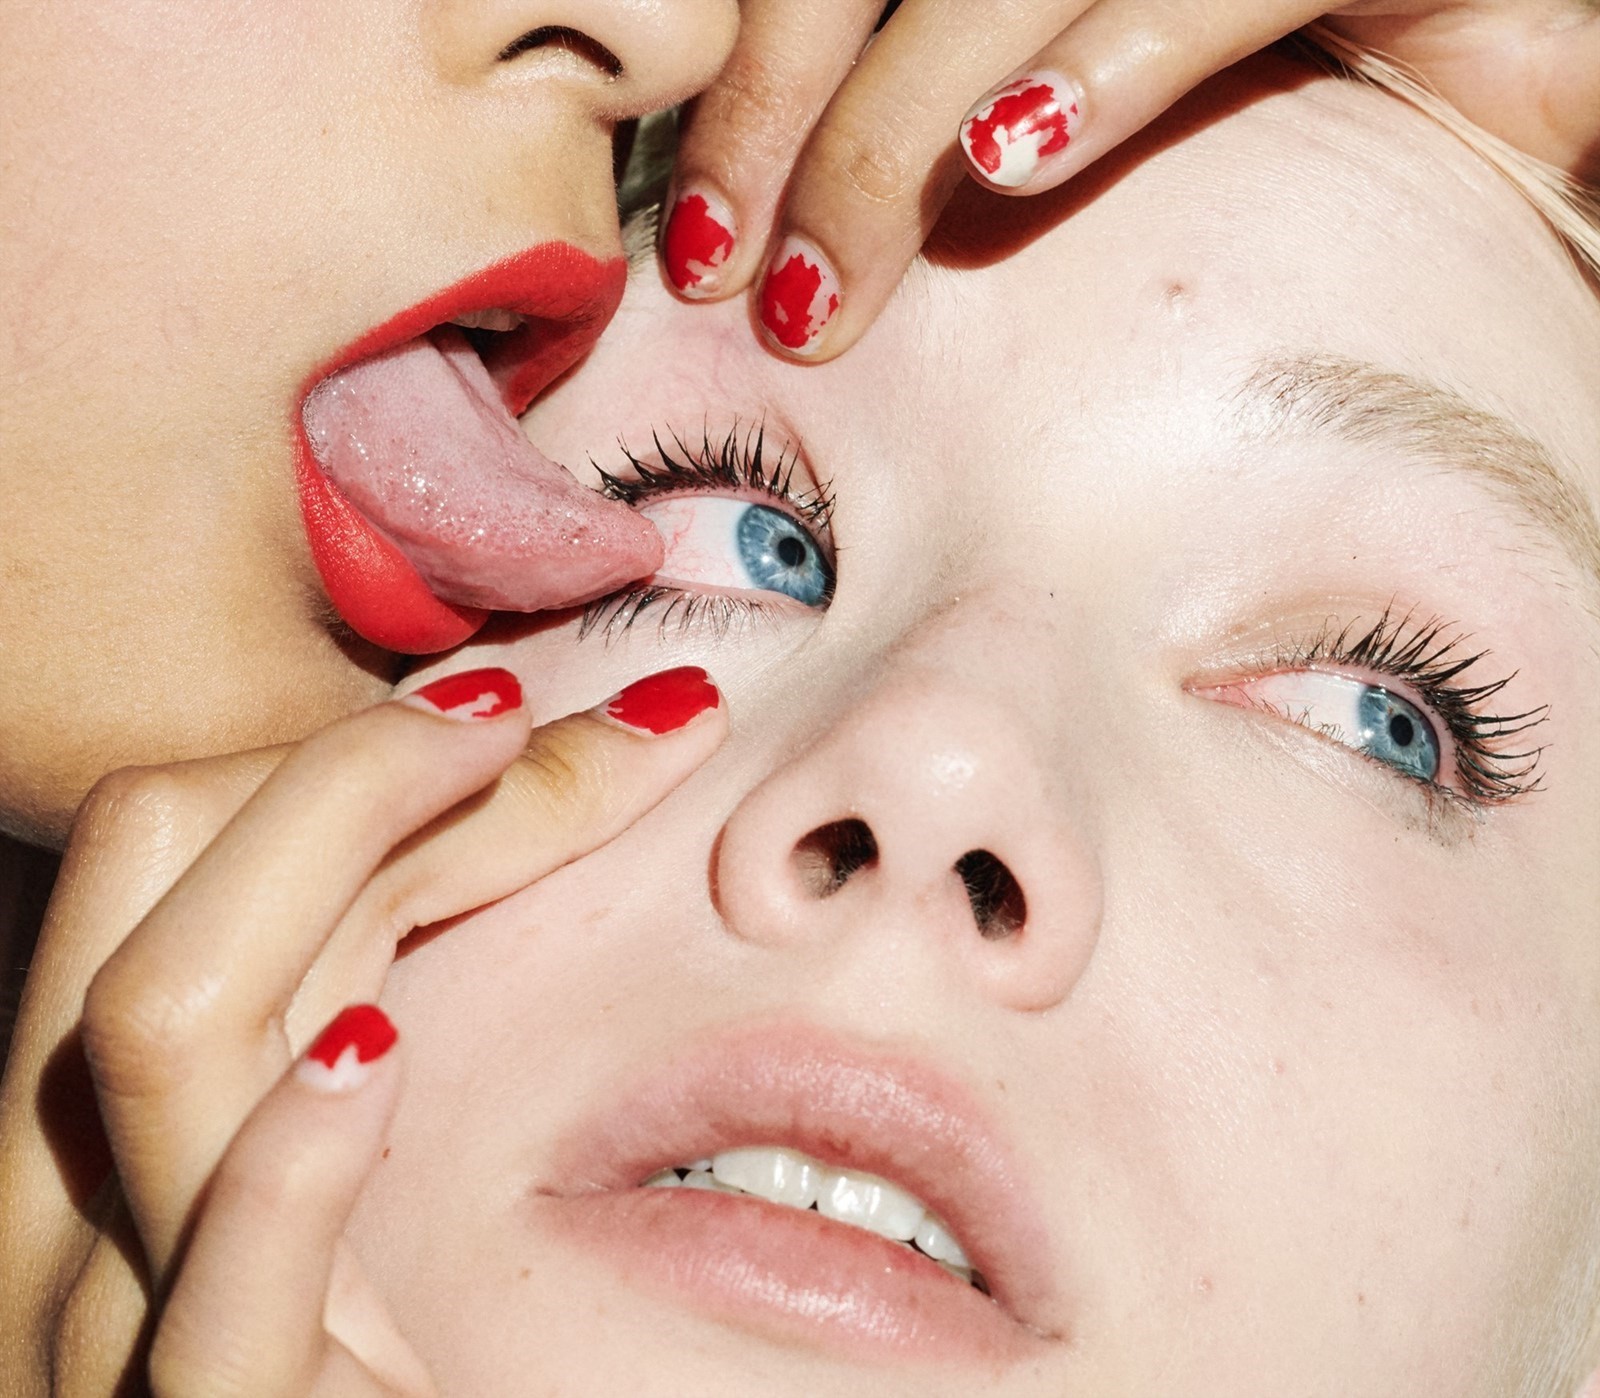 We speak to the people who get off on licking eye balls | Dazed